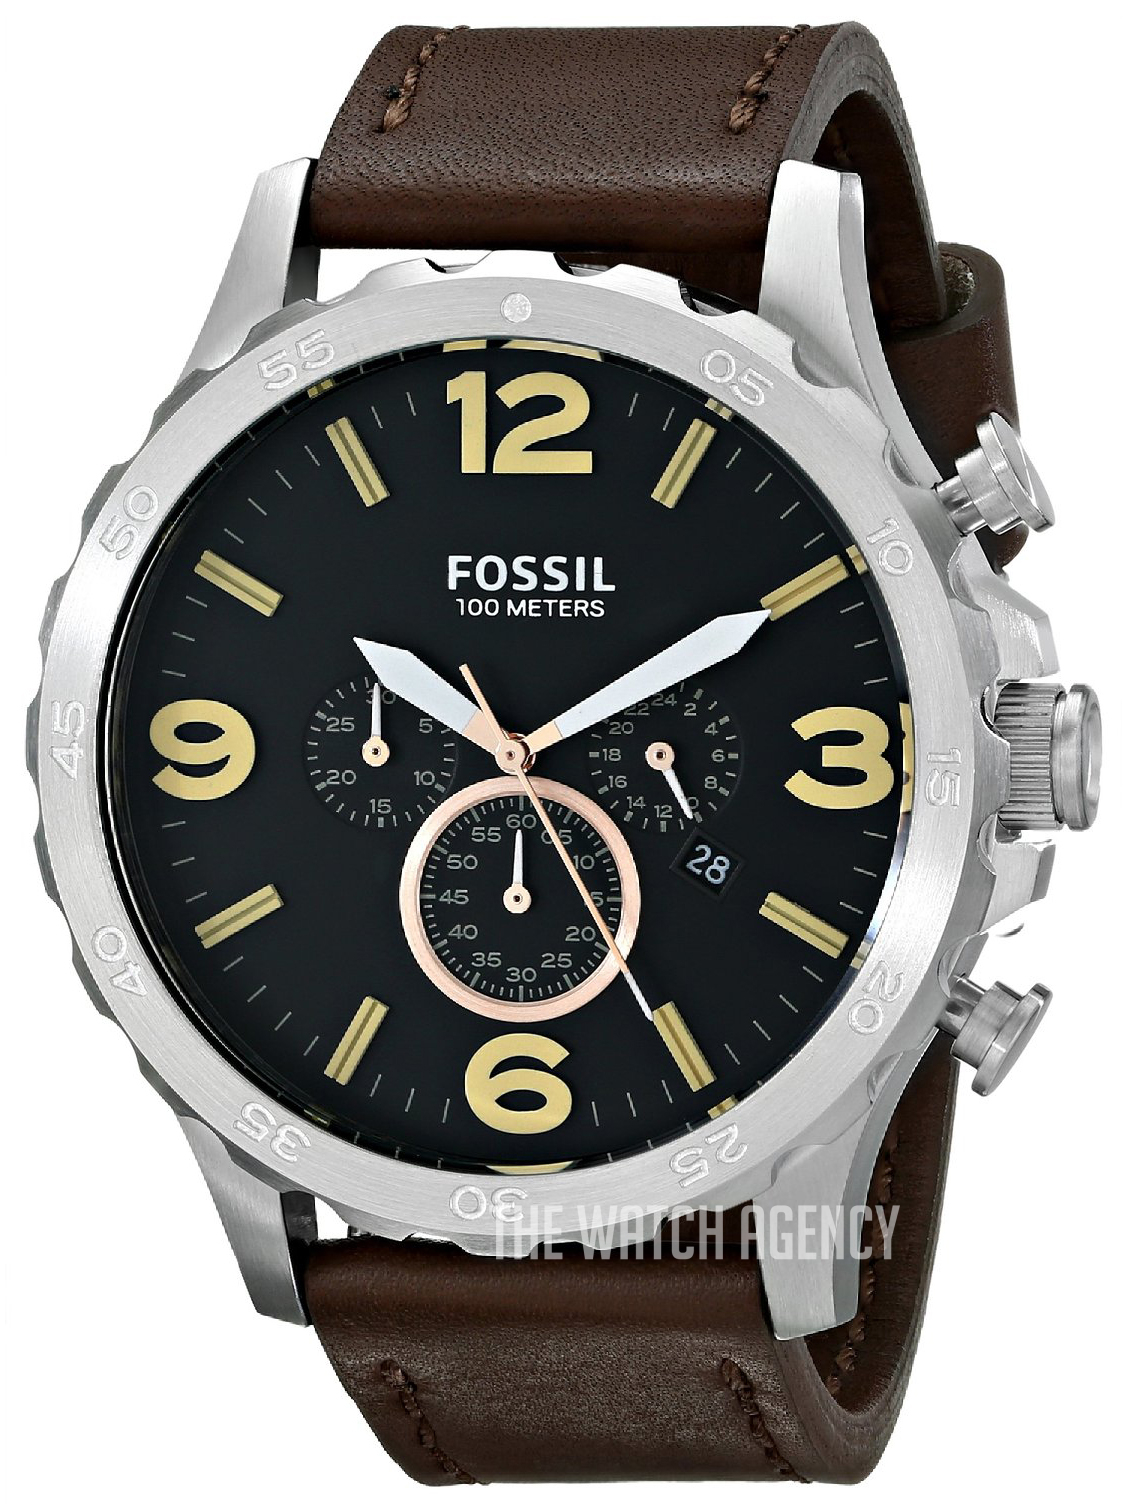 JR1475 Fossil Nate | TheWatchAgency™